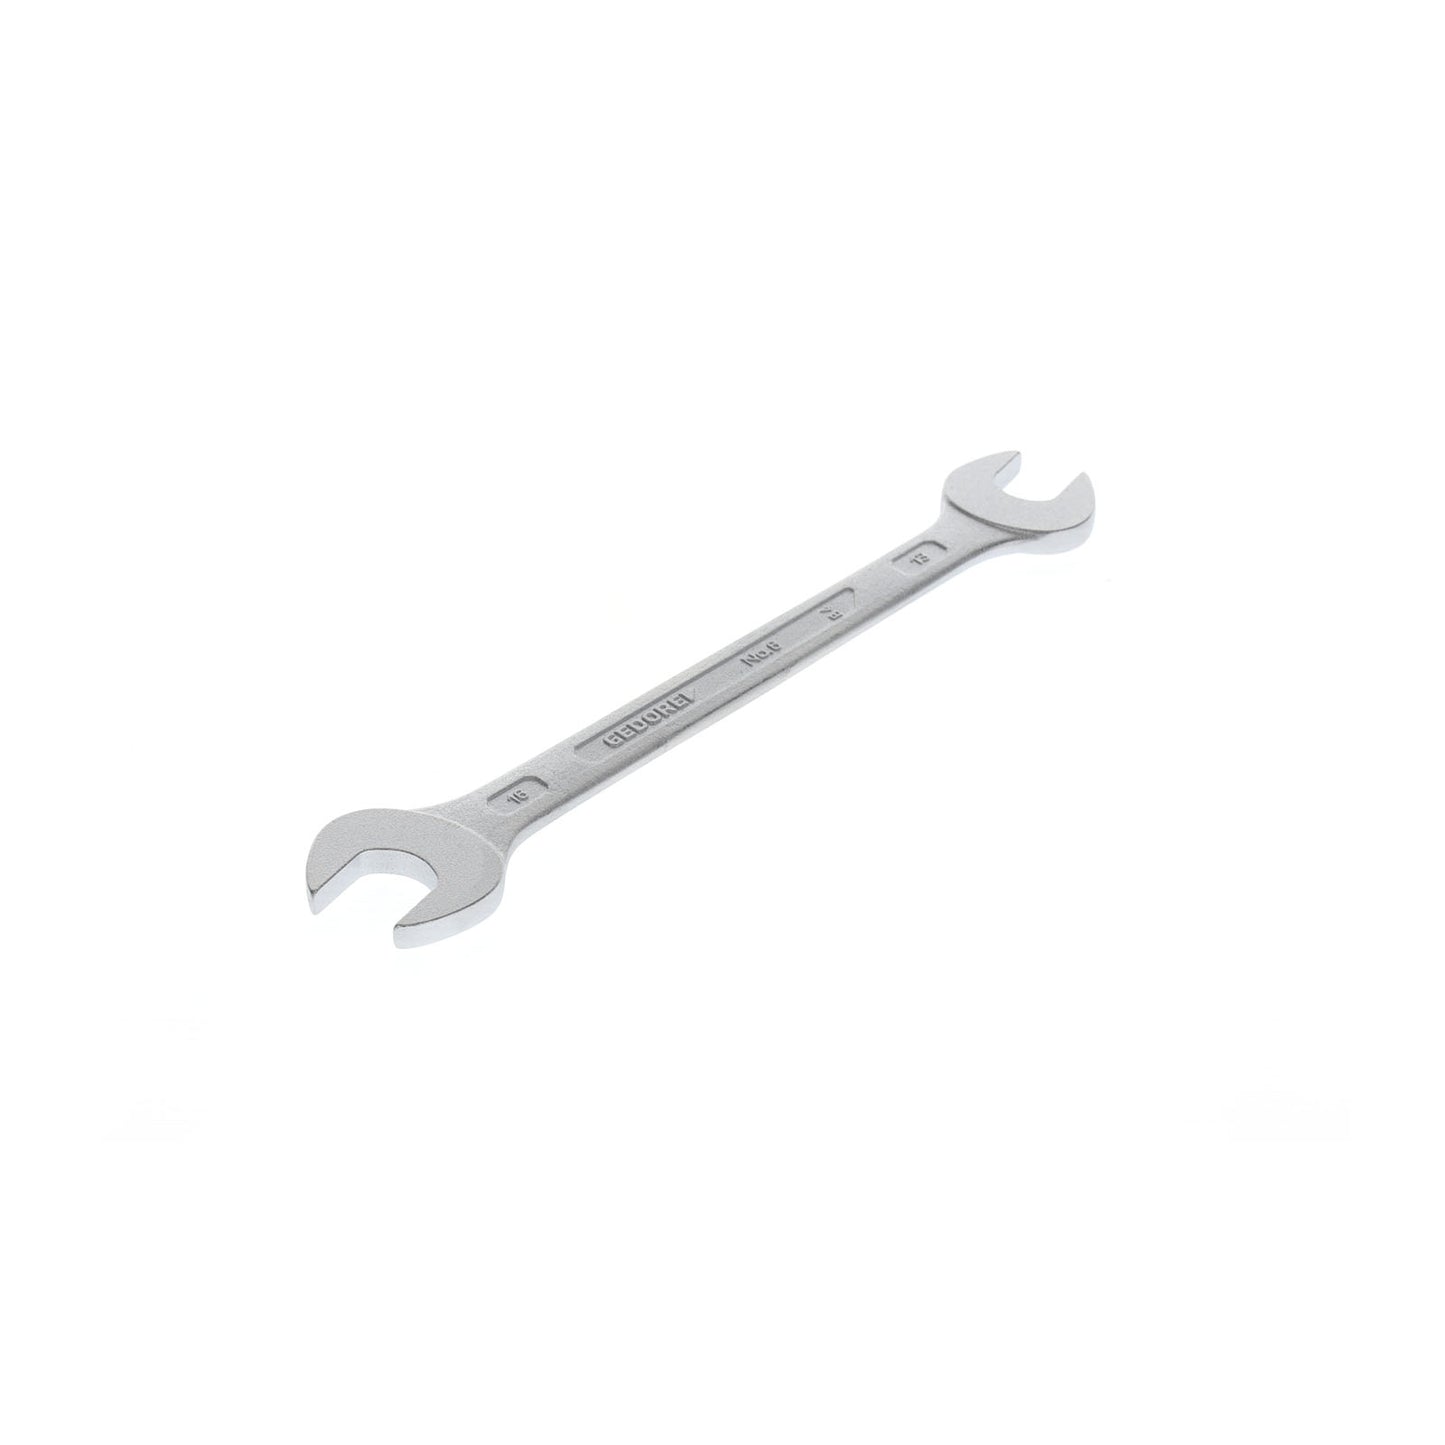 GEDORE 6 13X16 - 2-Mount Fixed Wrench, 13x16 (6068980)